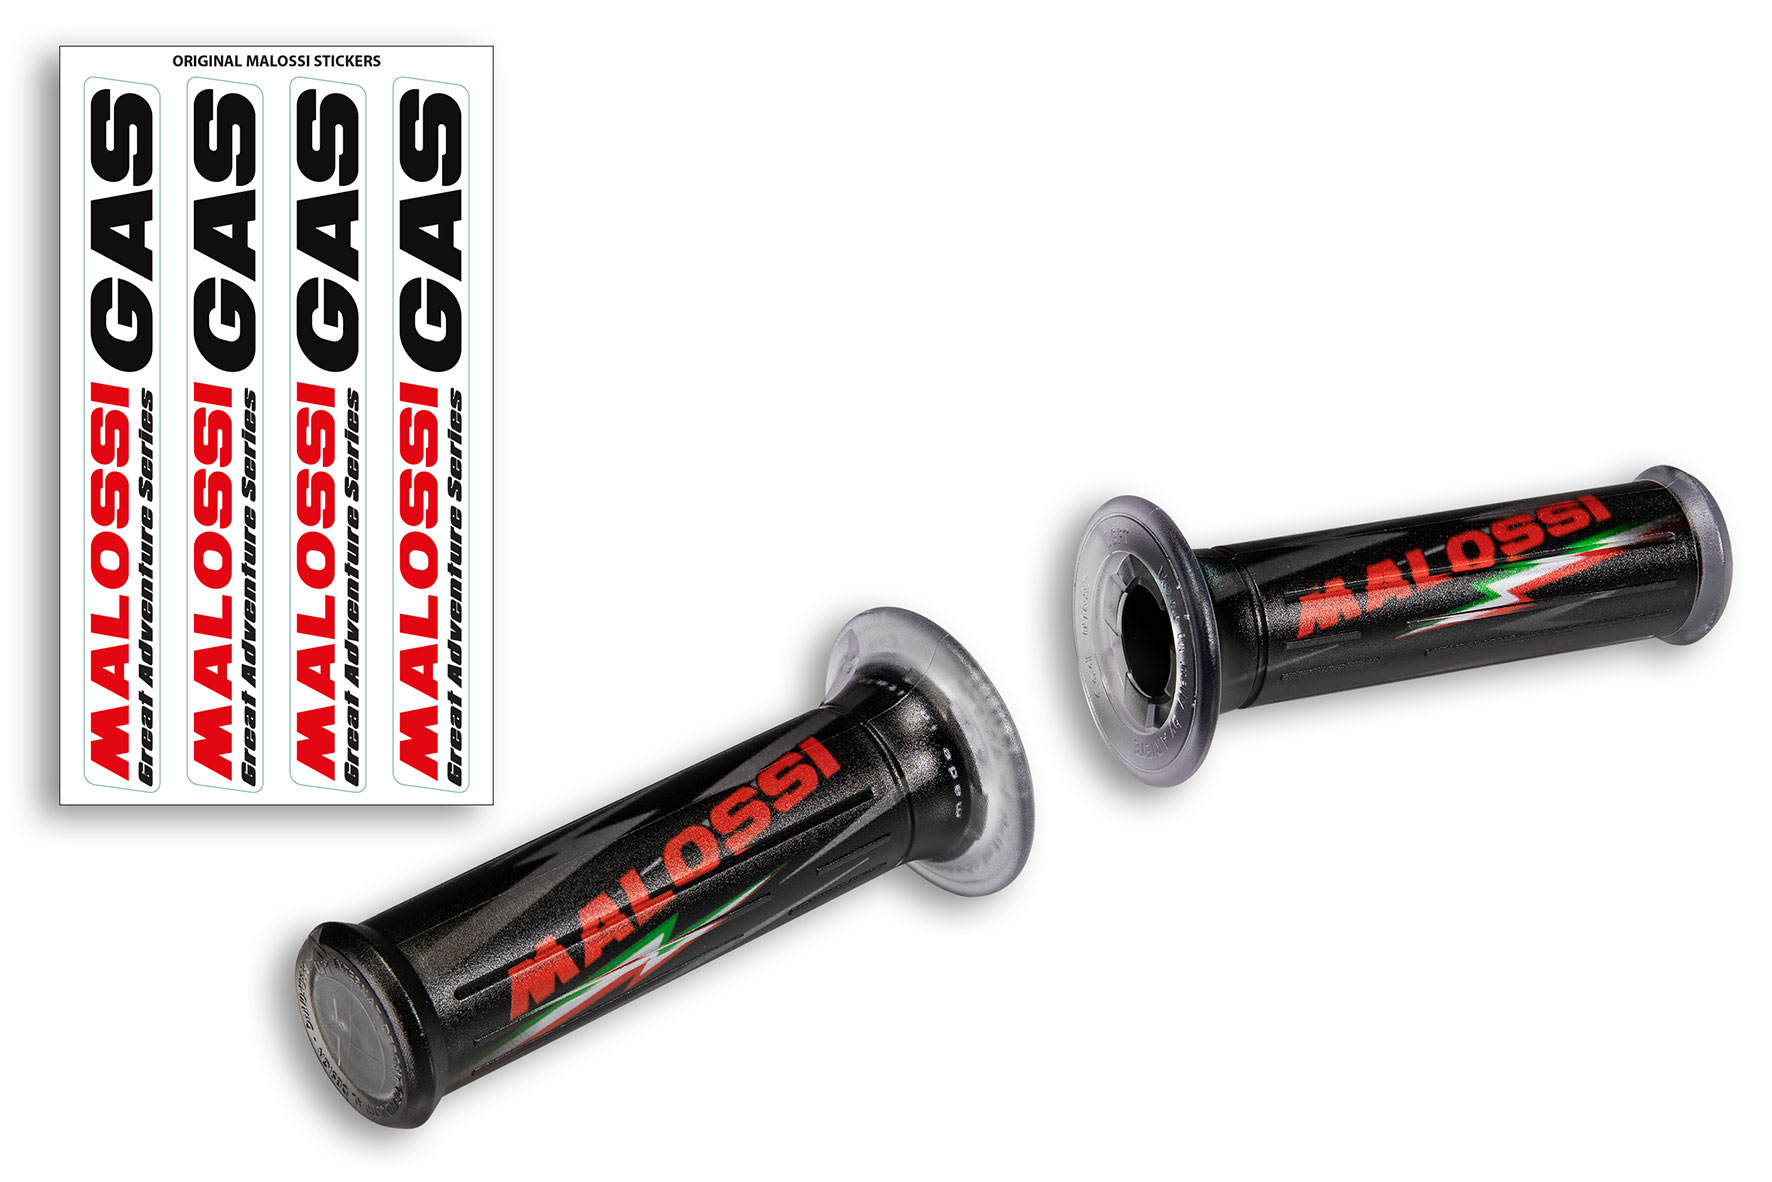 2 BLACK GRIPS GAS Malossi (mod. with side fastening)